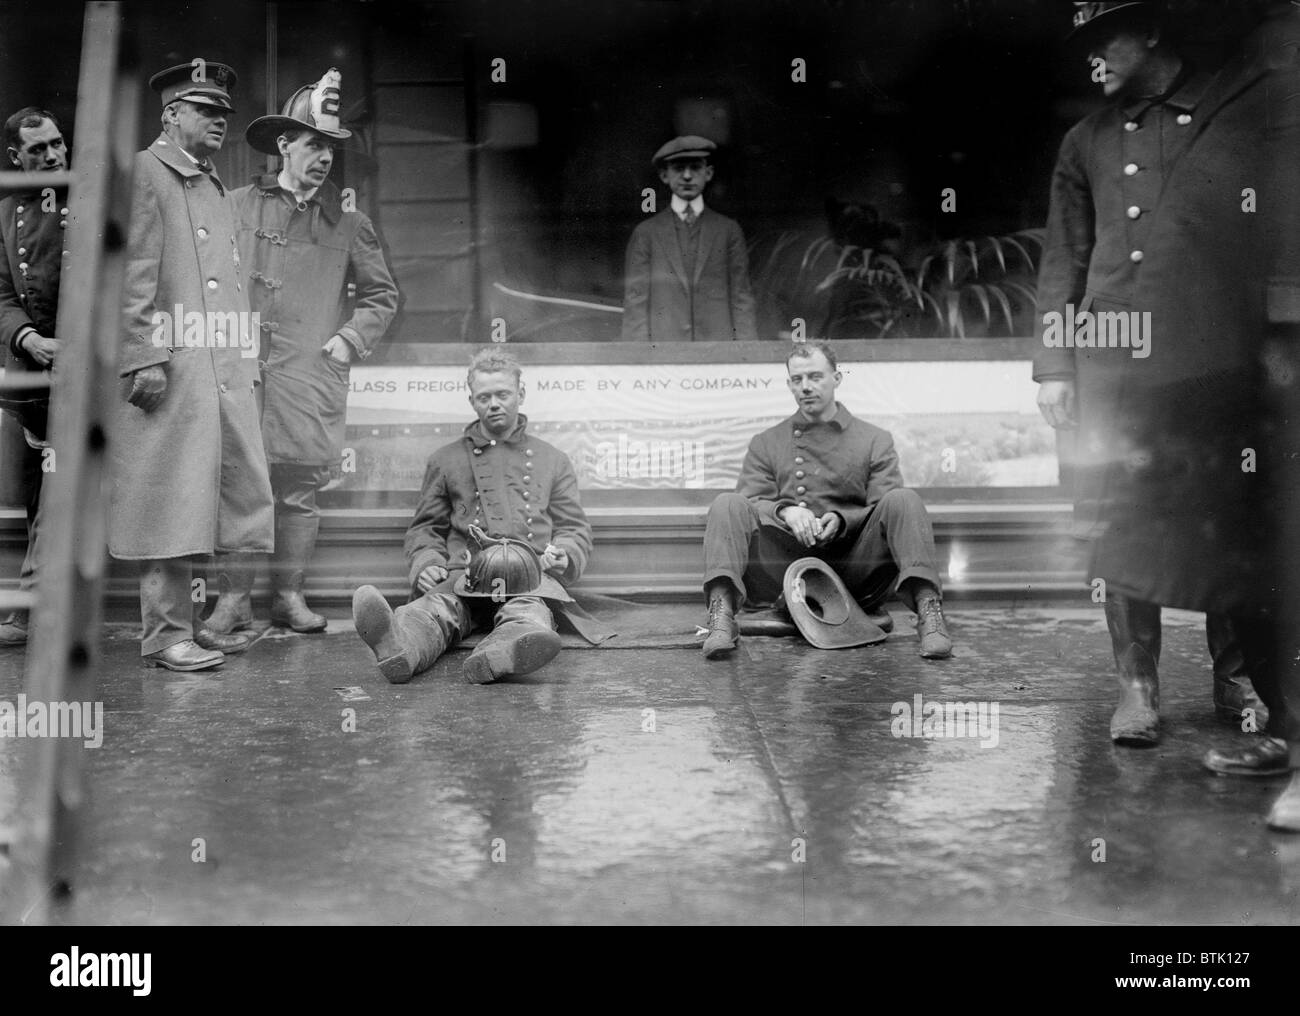 New York City subway fire overcome, Broadway and West 55th Street, New York City, photograph, January 6, 1915. Stock Photo